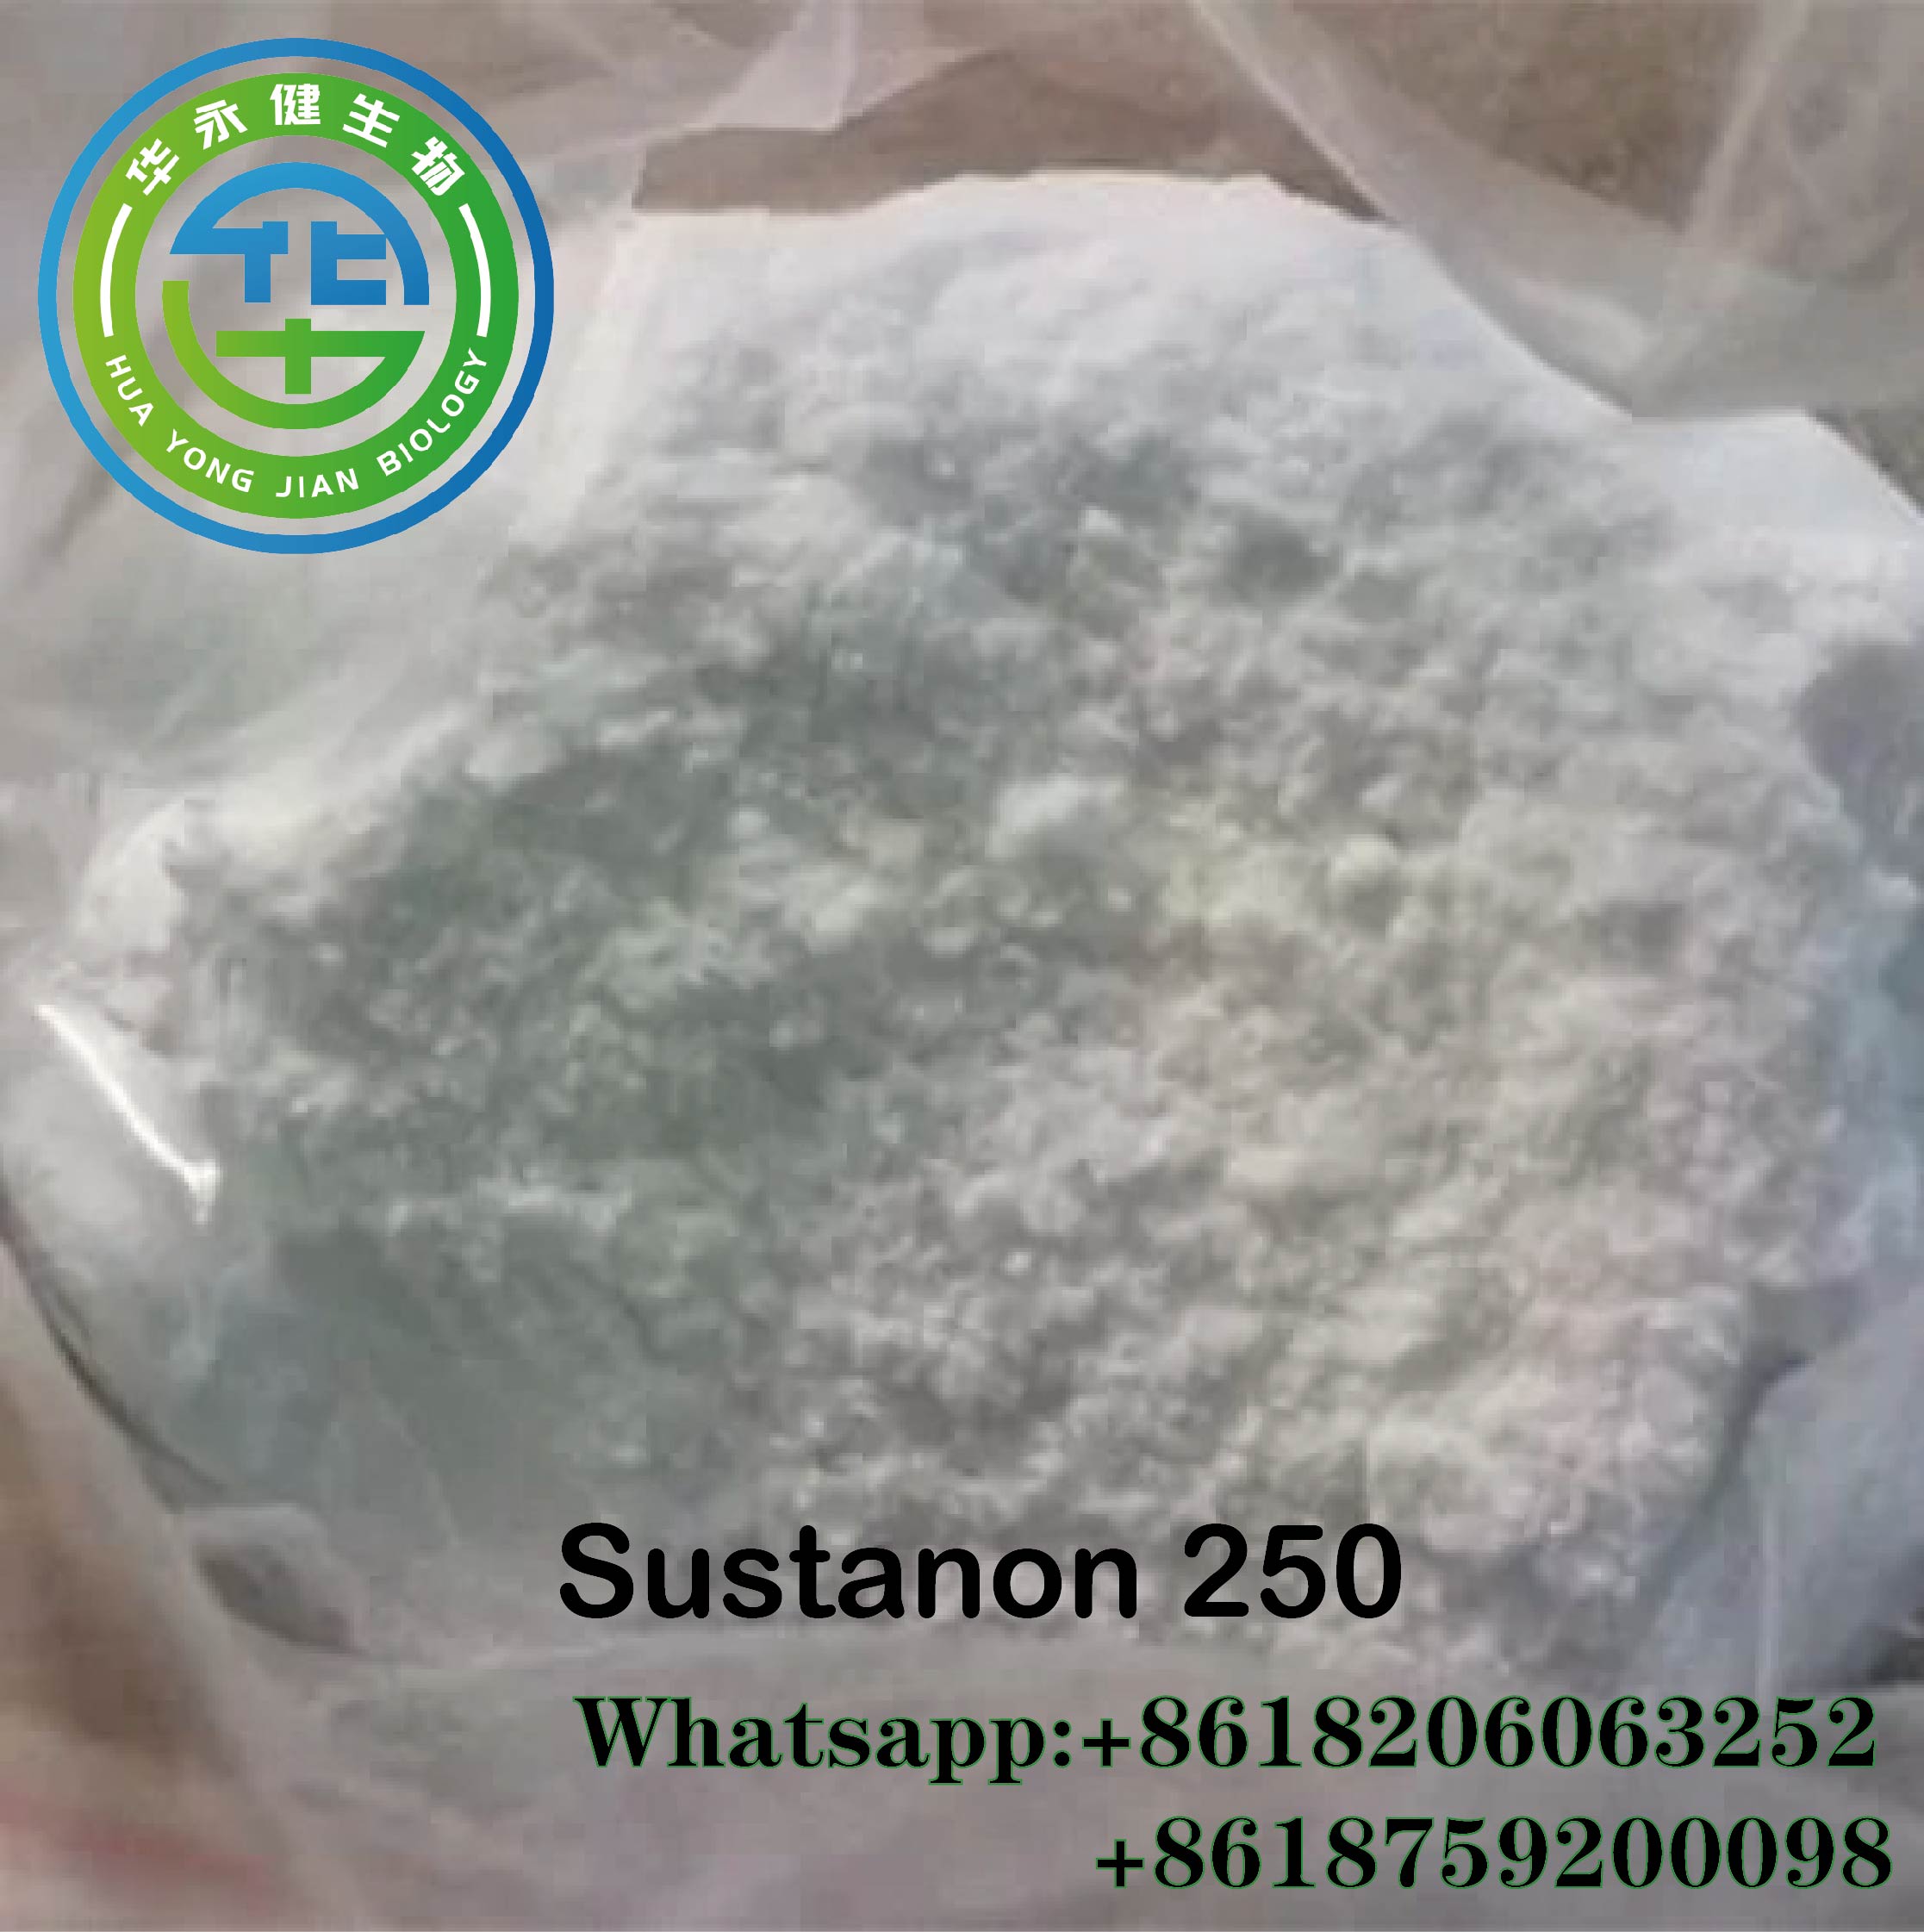 Hoʻonui Kāne S250 Oral Anabolic Steroid Testosterone Sustanon 250 Muscle Growth Steroids Powder